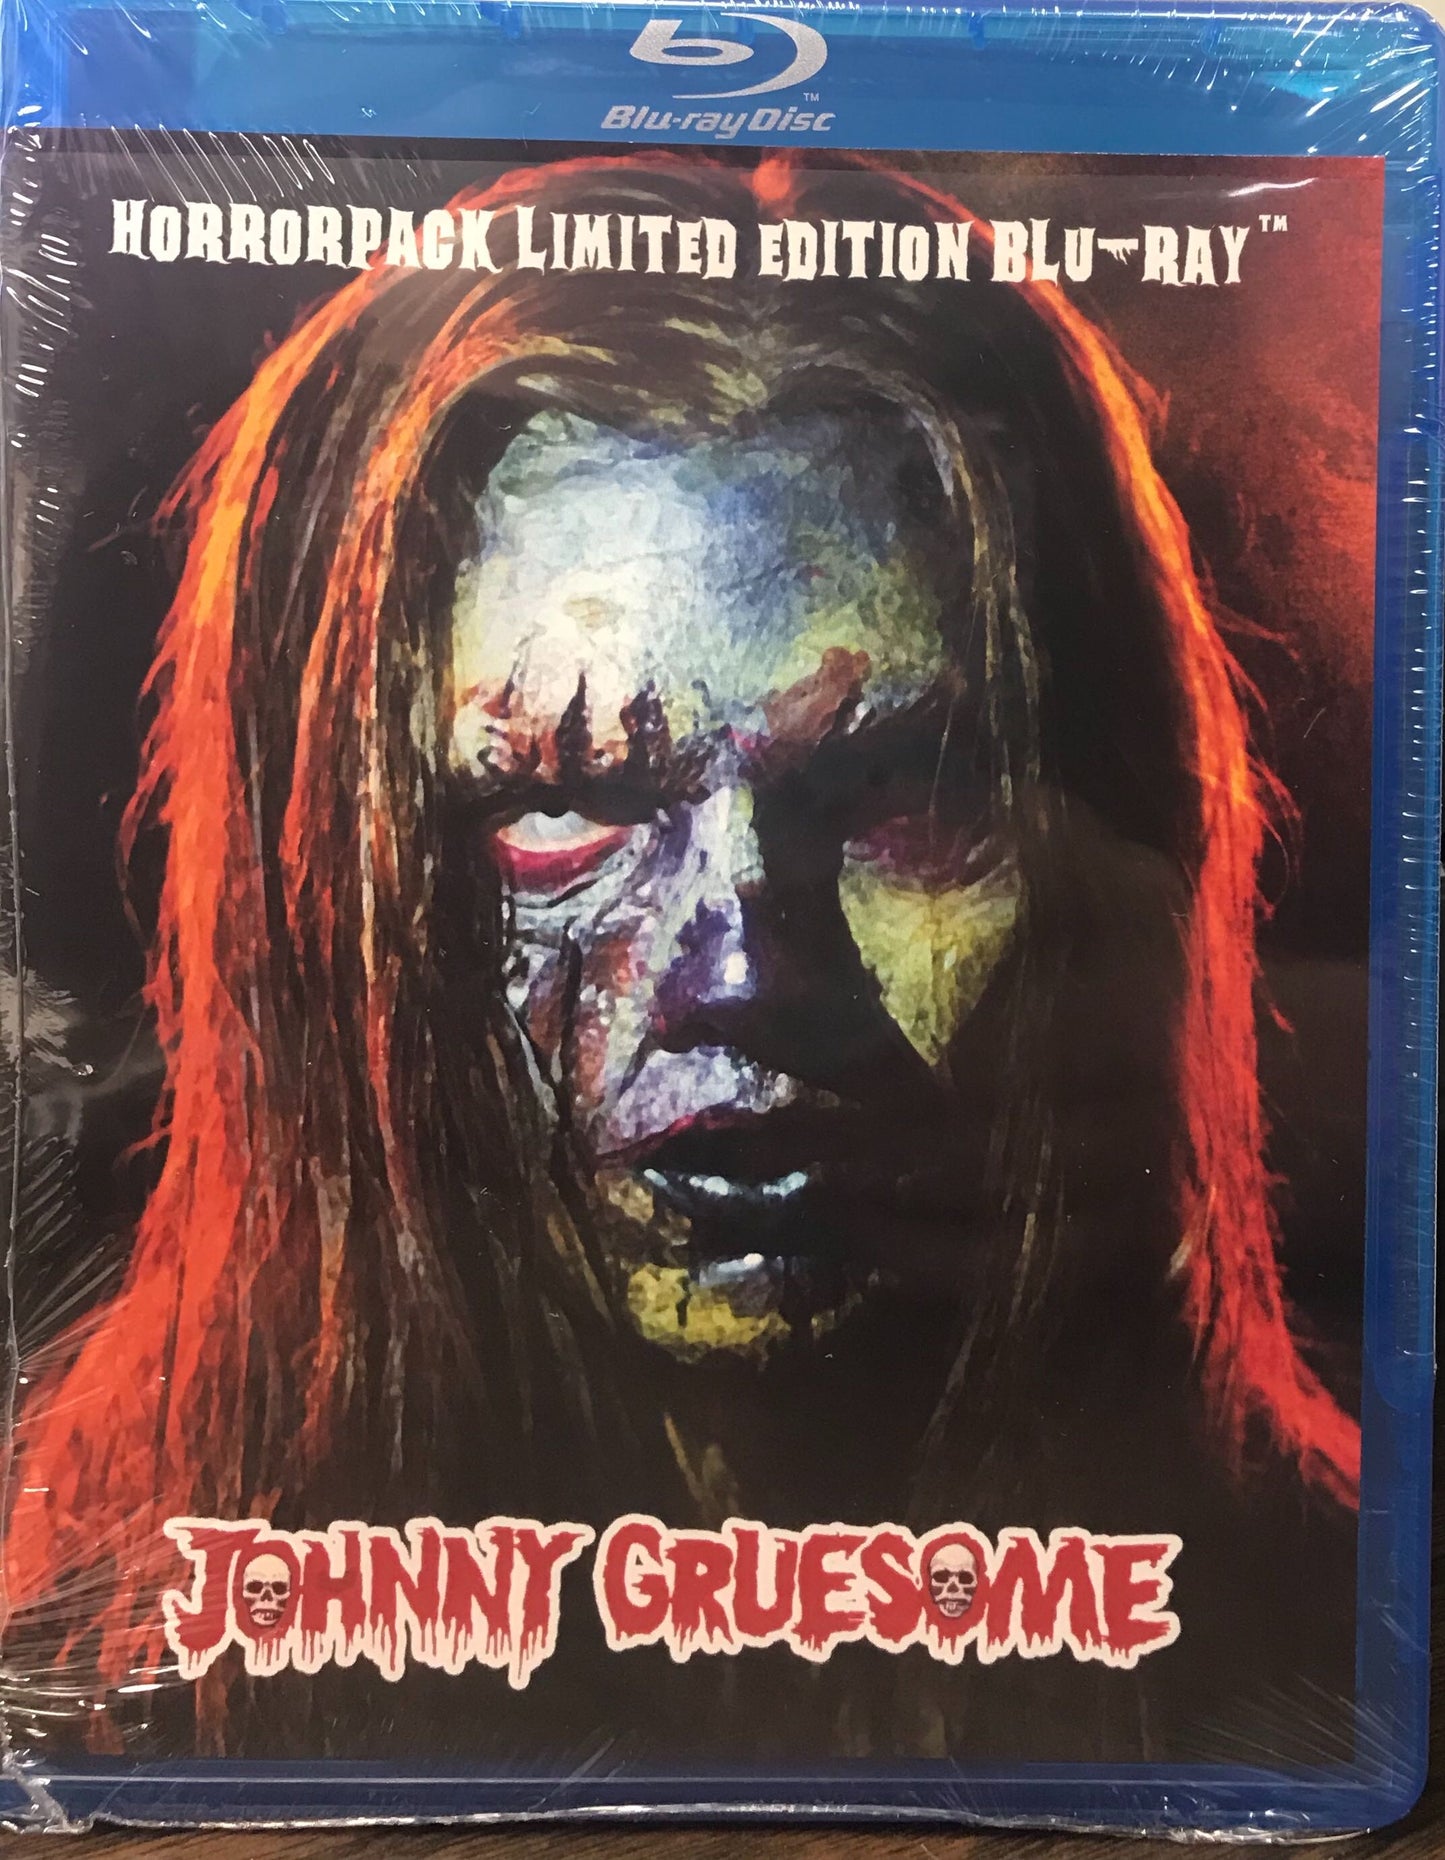 Johnny Gruesome - HorrorPack Limited Edition Blu-ray #43